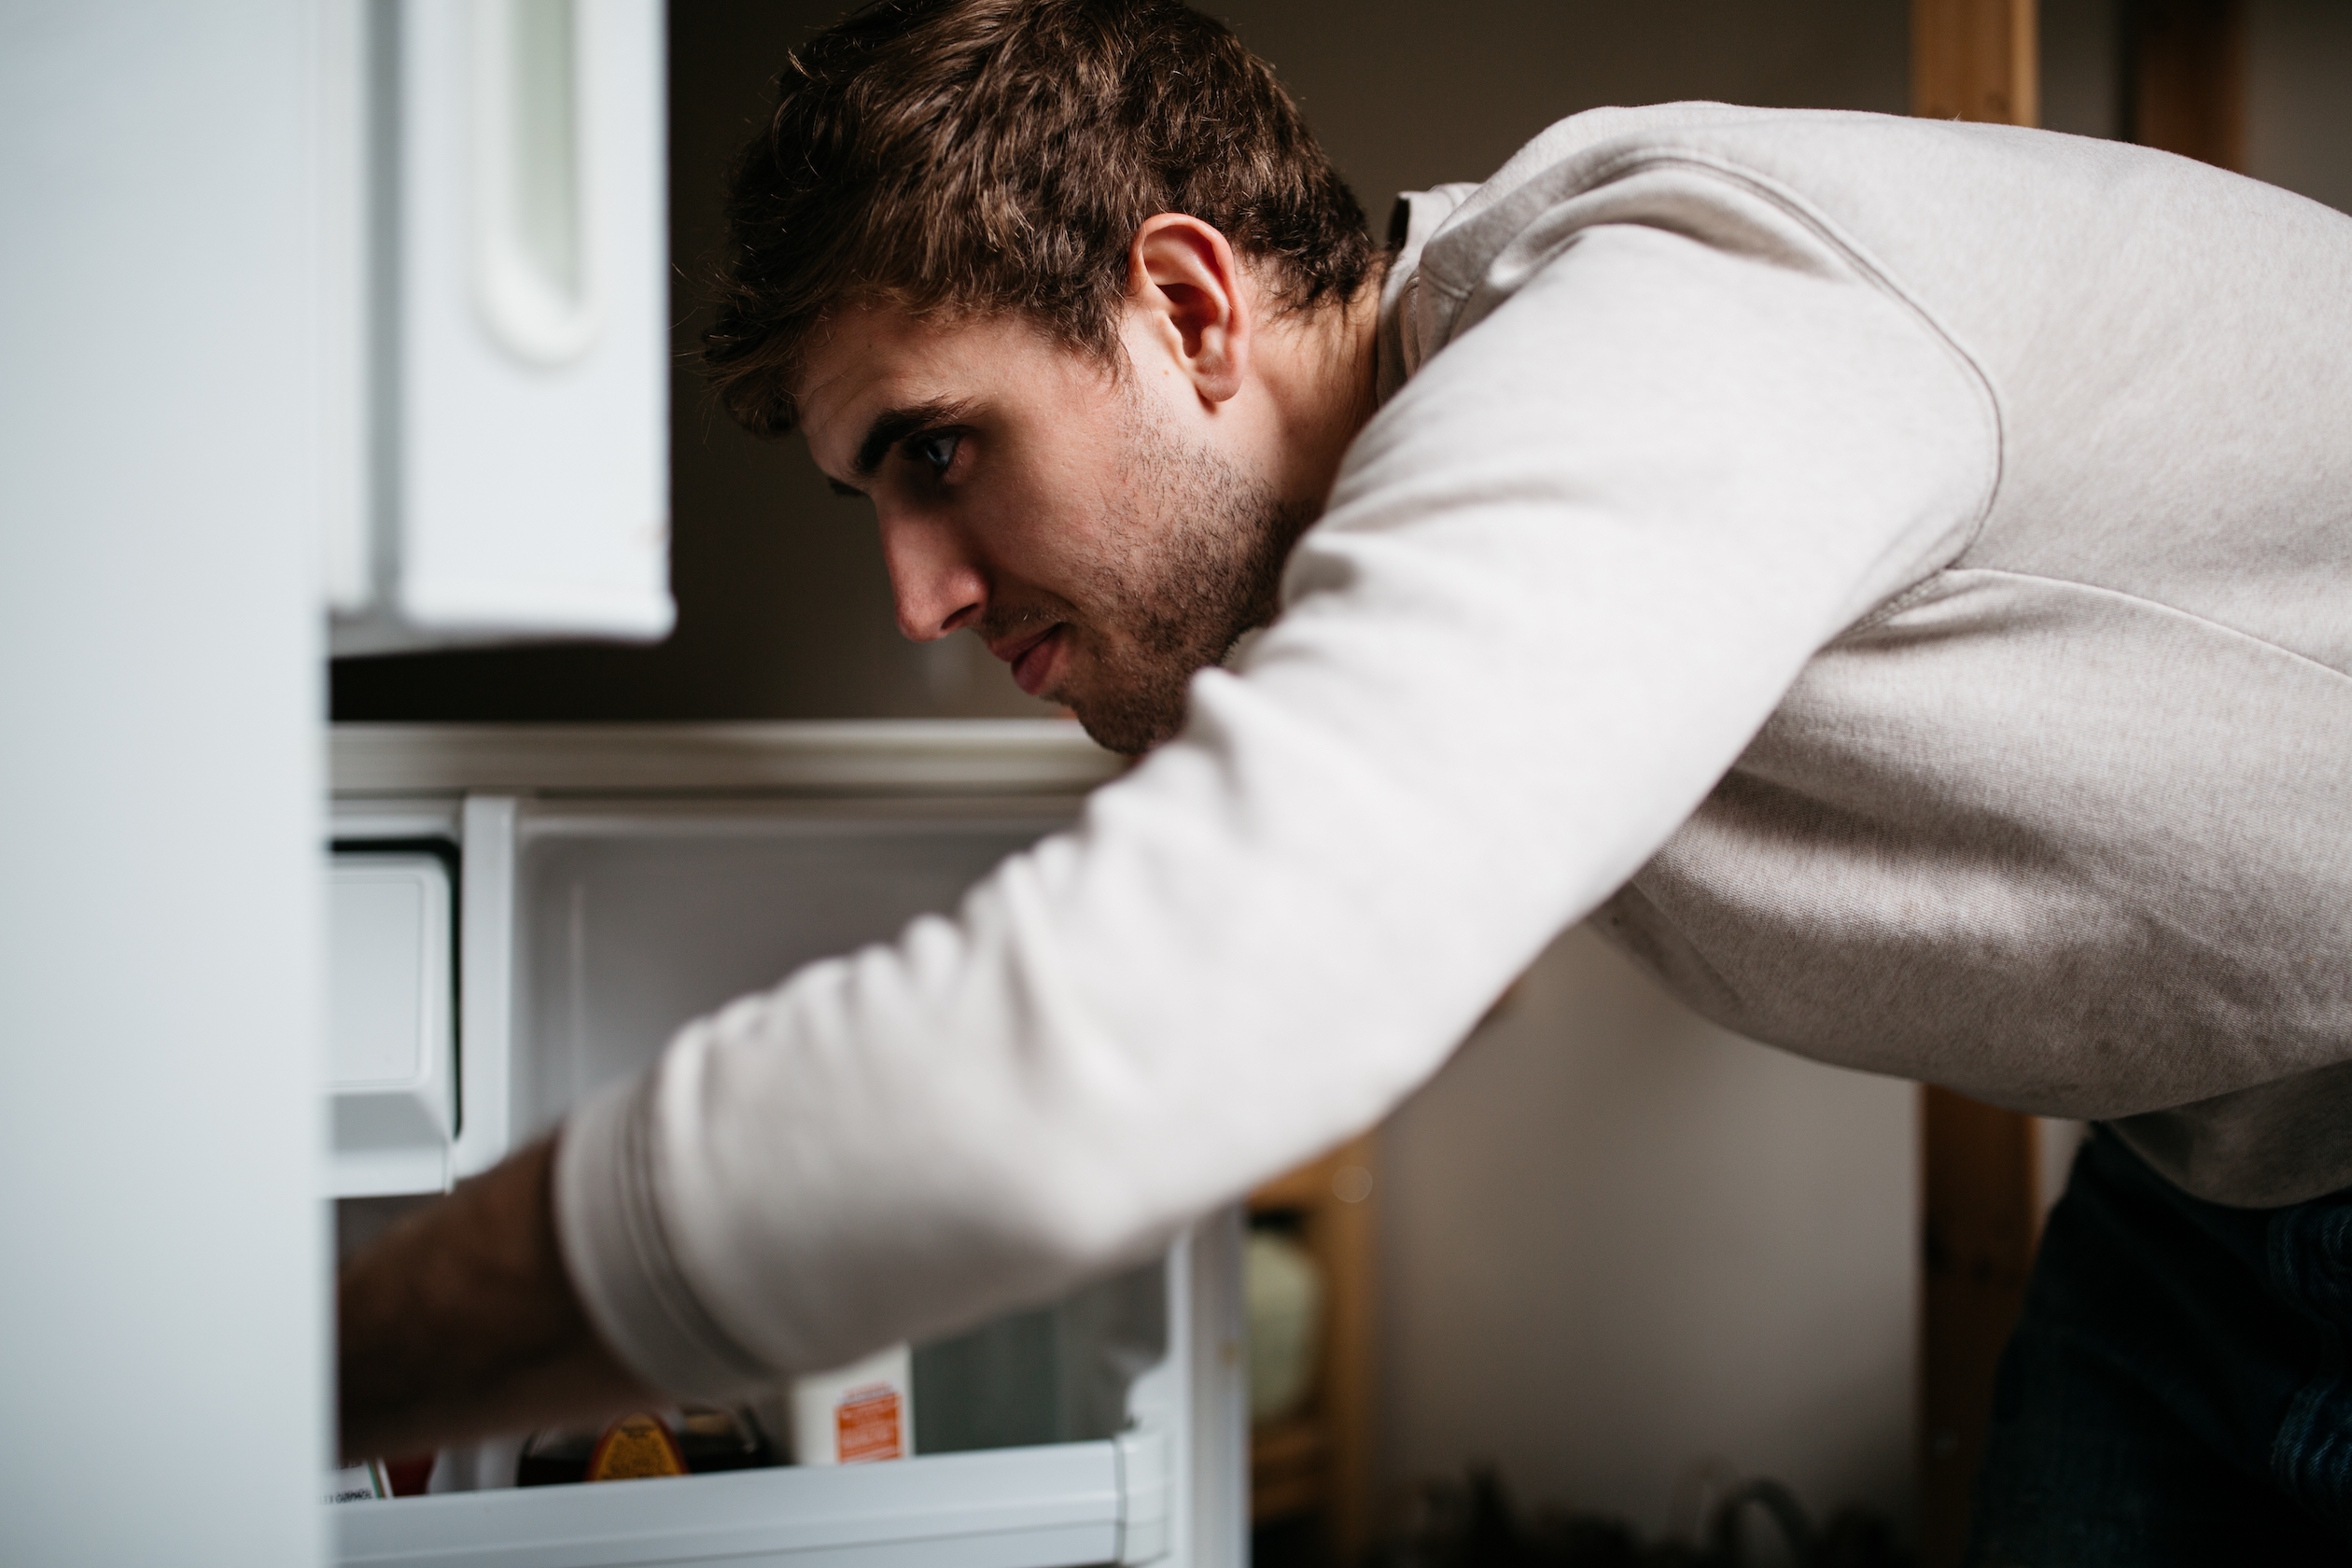 Photo of a person reaching into a refrigerator.